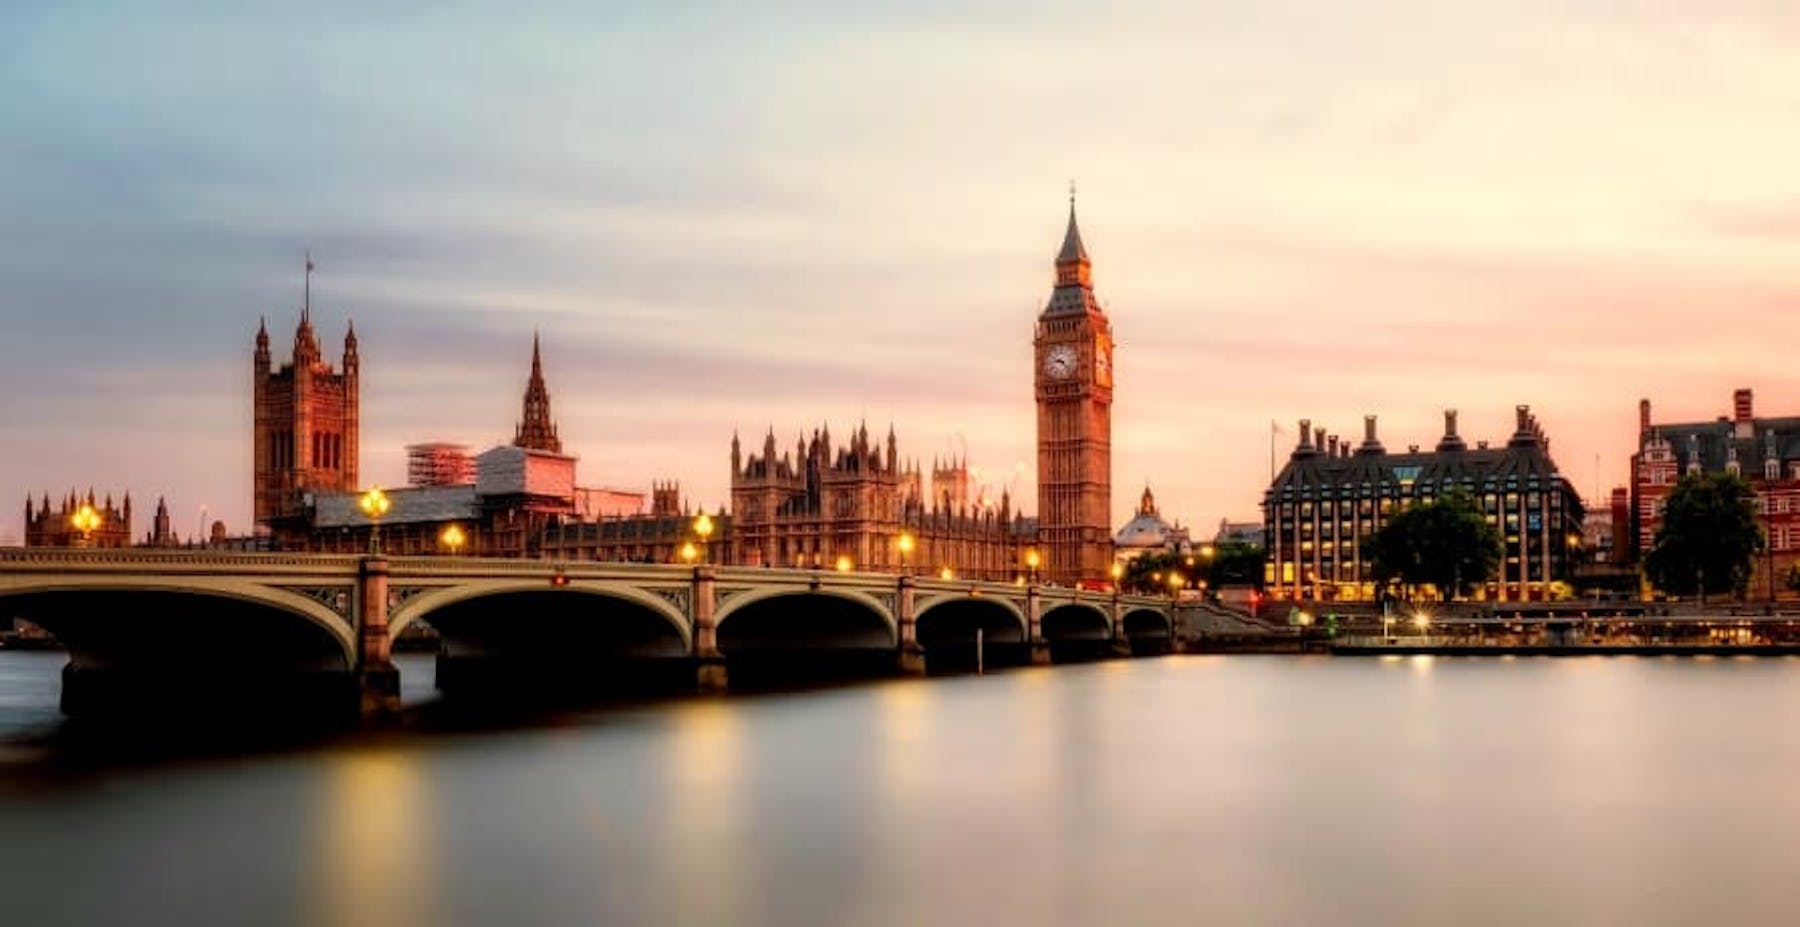 Westminster and the Thames River in London at sunset